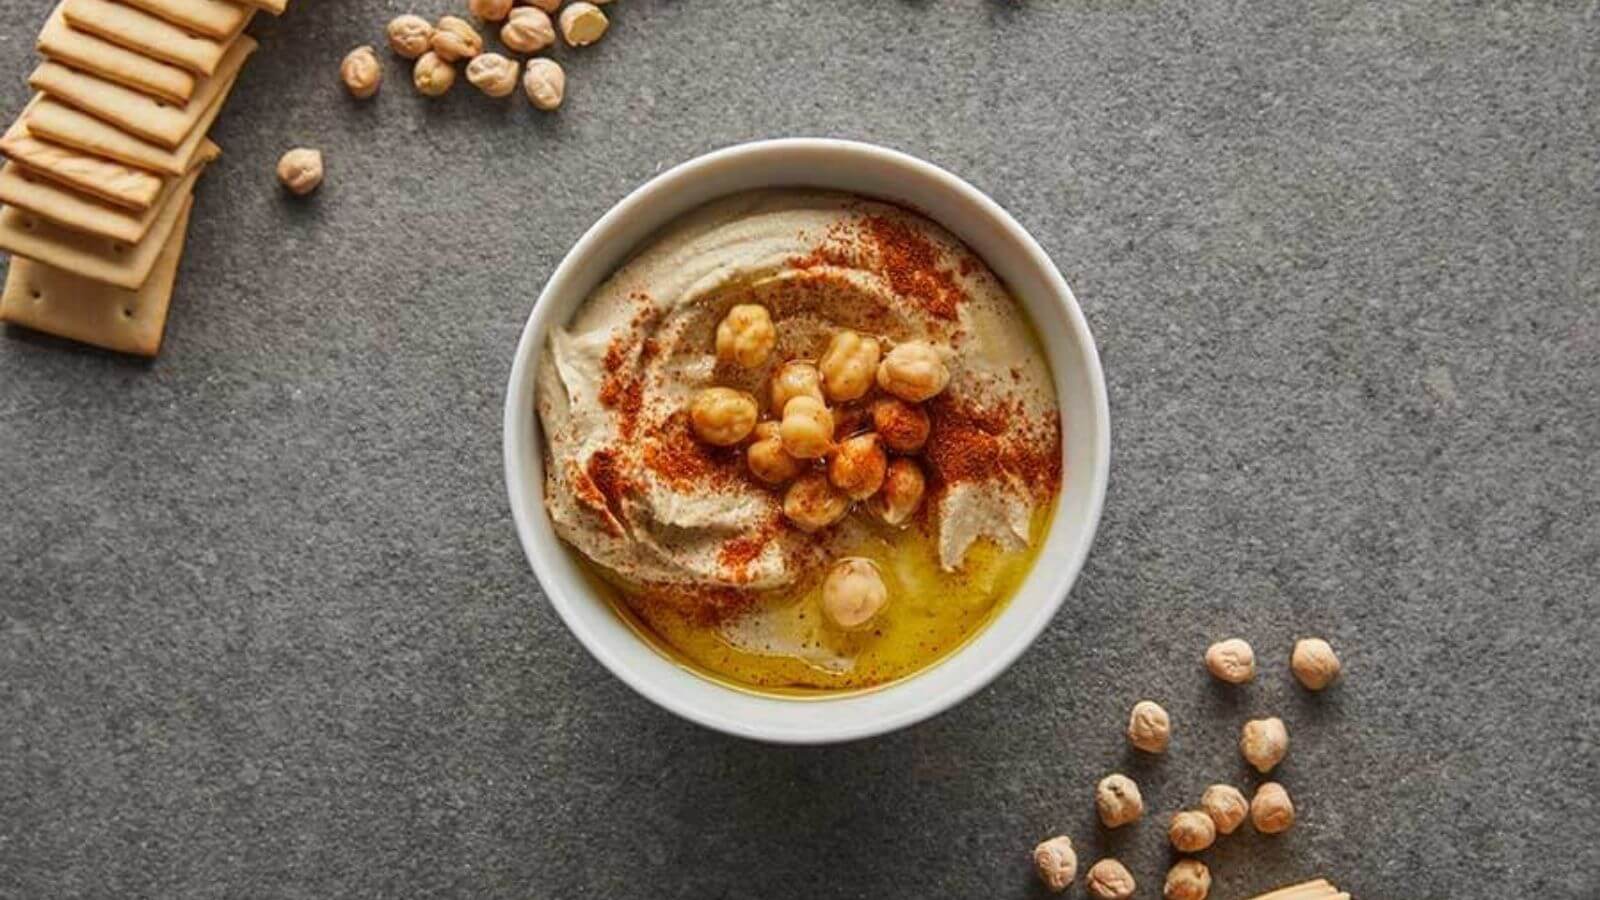 bowl of hummus topped with chickpeas, surrounded by chickpeas and crackers